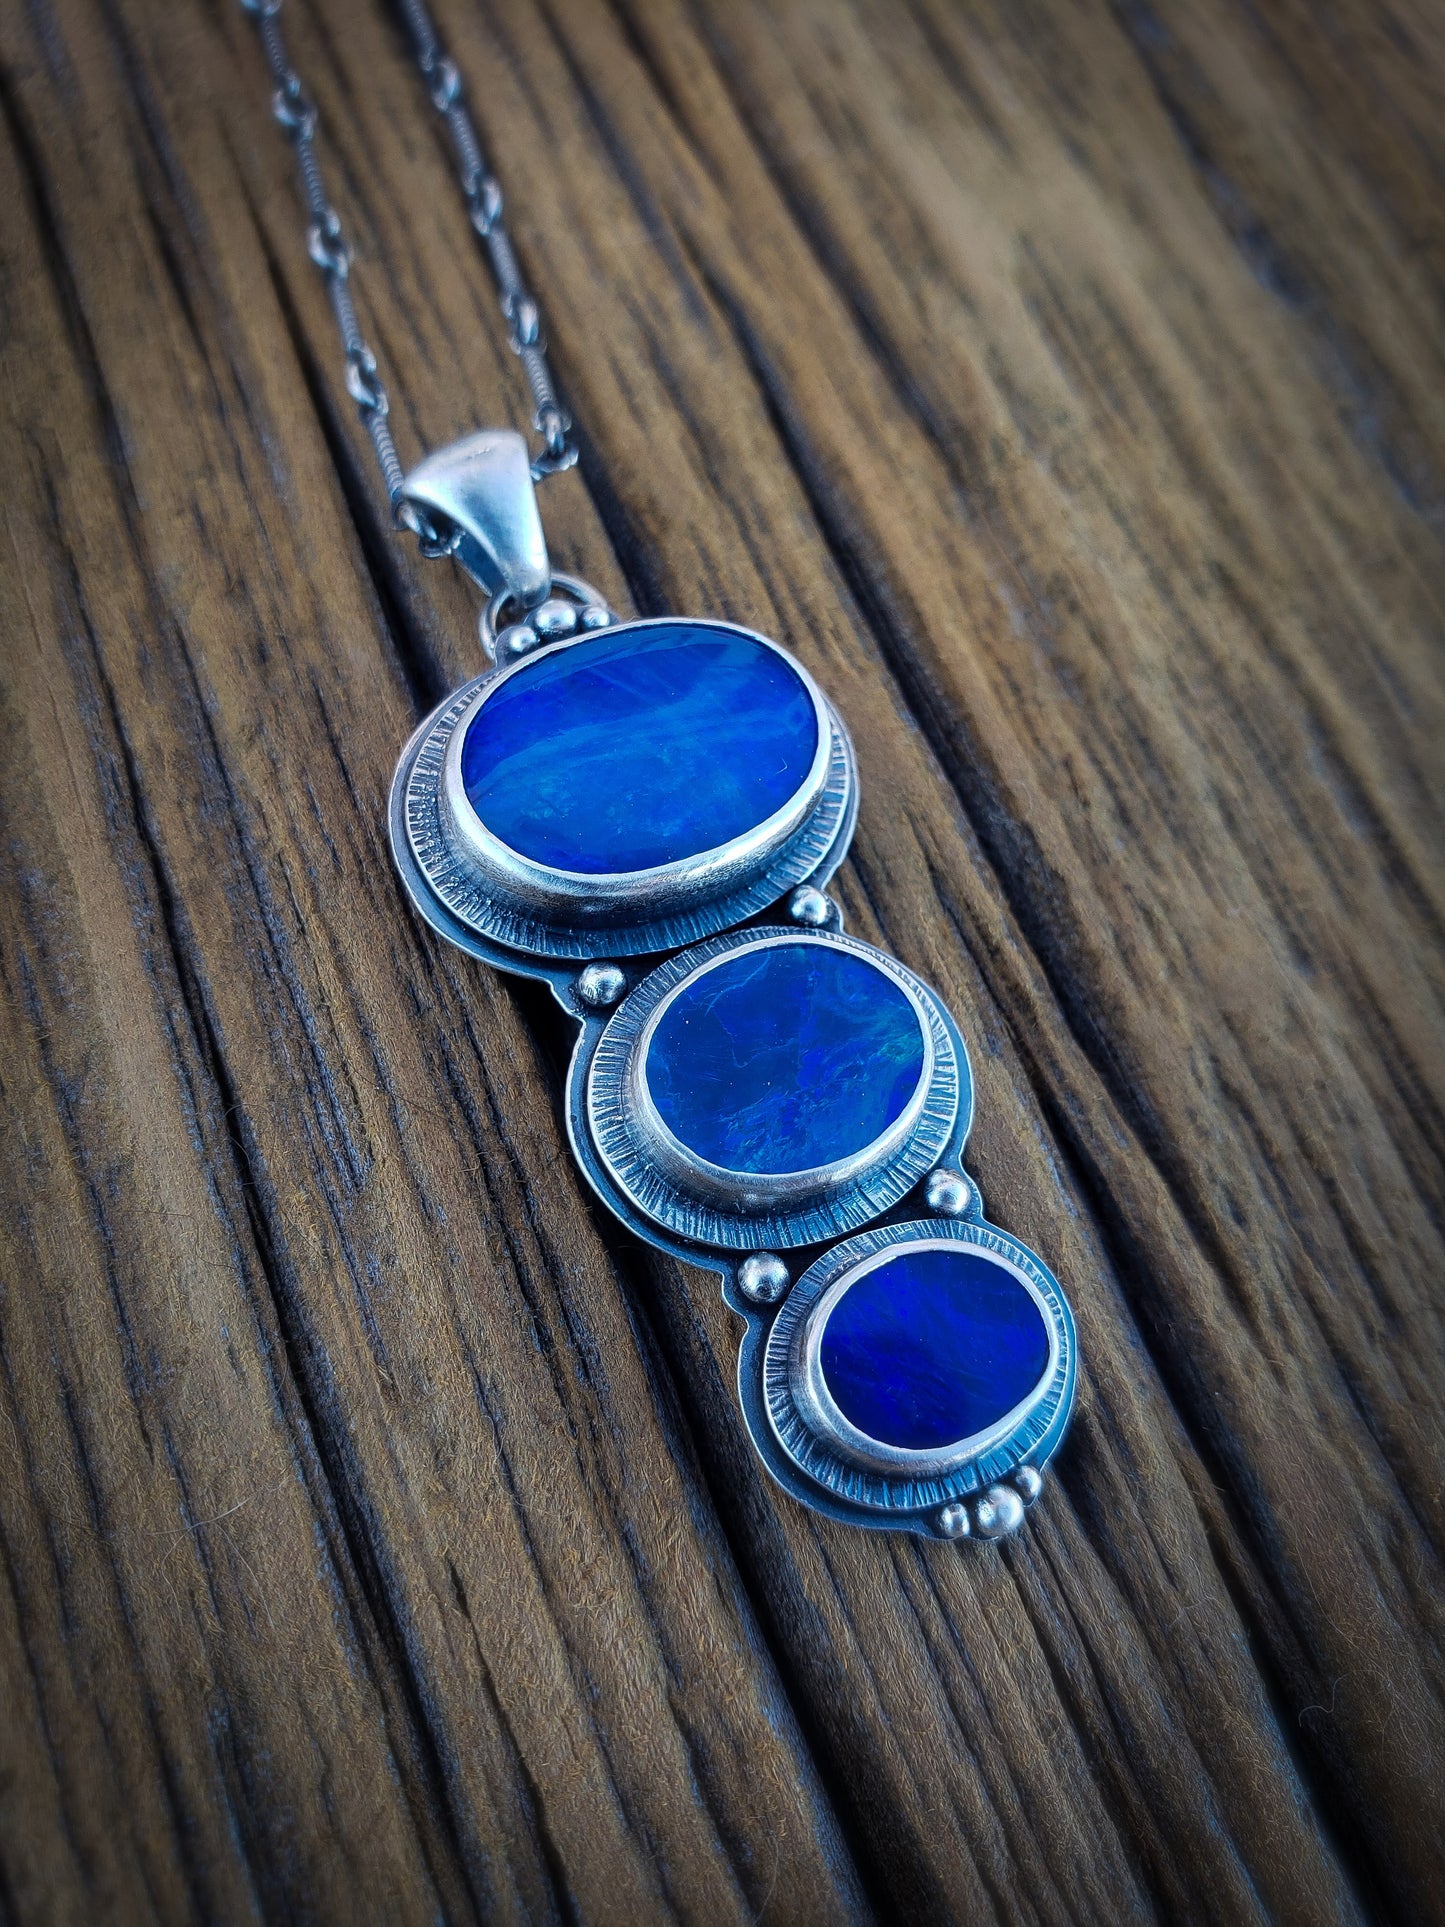 Black Opal Stepping Stone Necklace